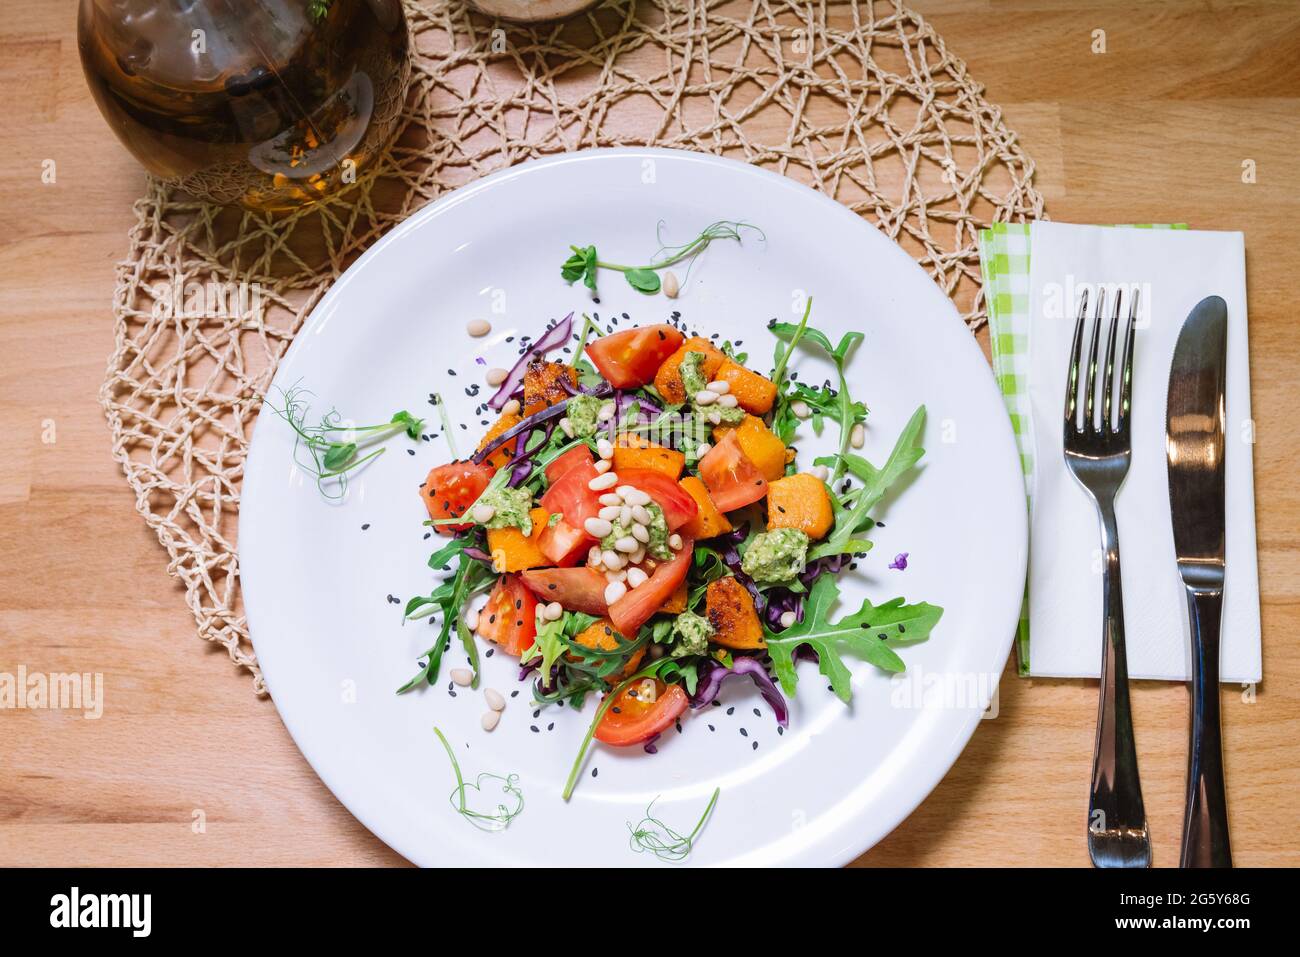 Warm salad with pumpkin, tomatoes, arugula, pesto sauce with pine nuts and black sesame seeds on white plate top view Stock Photo